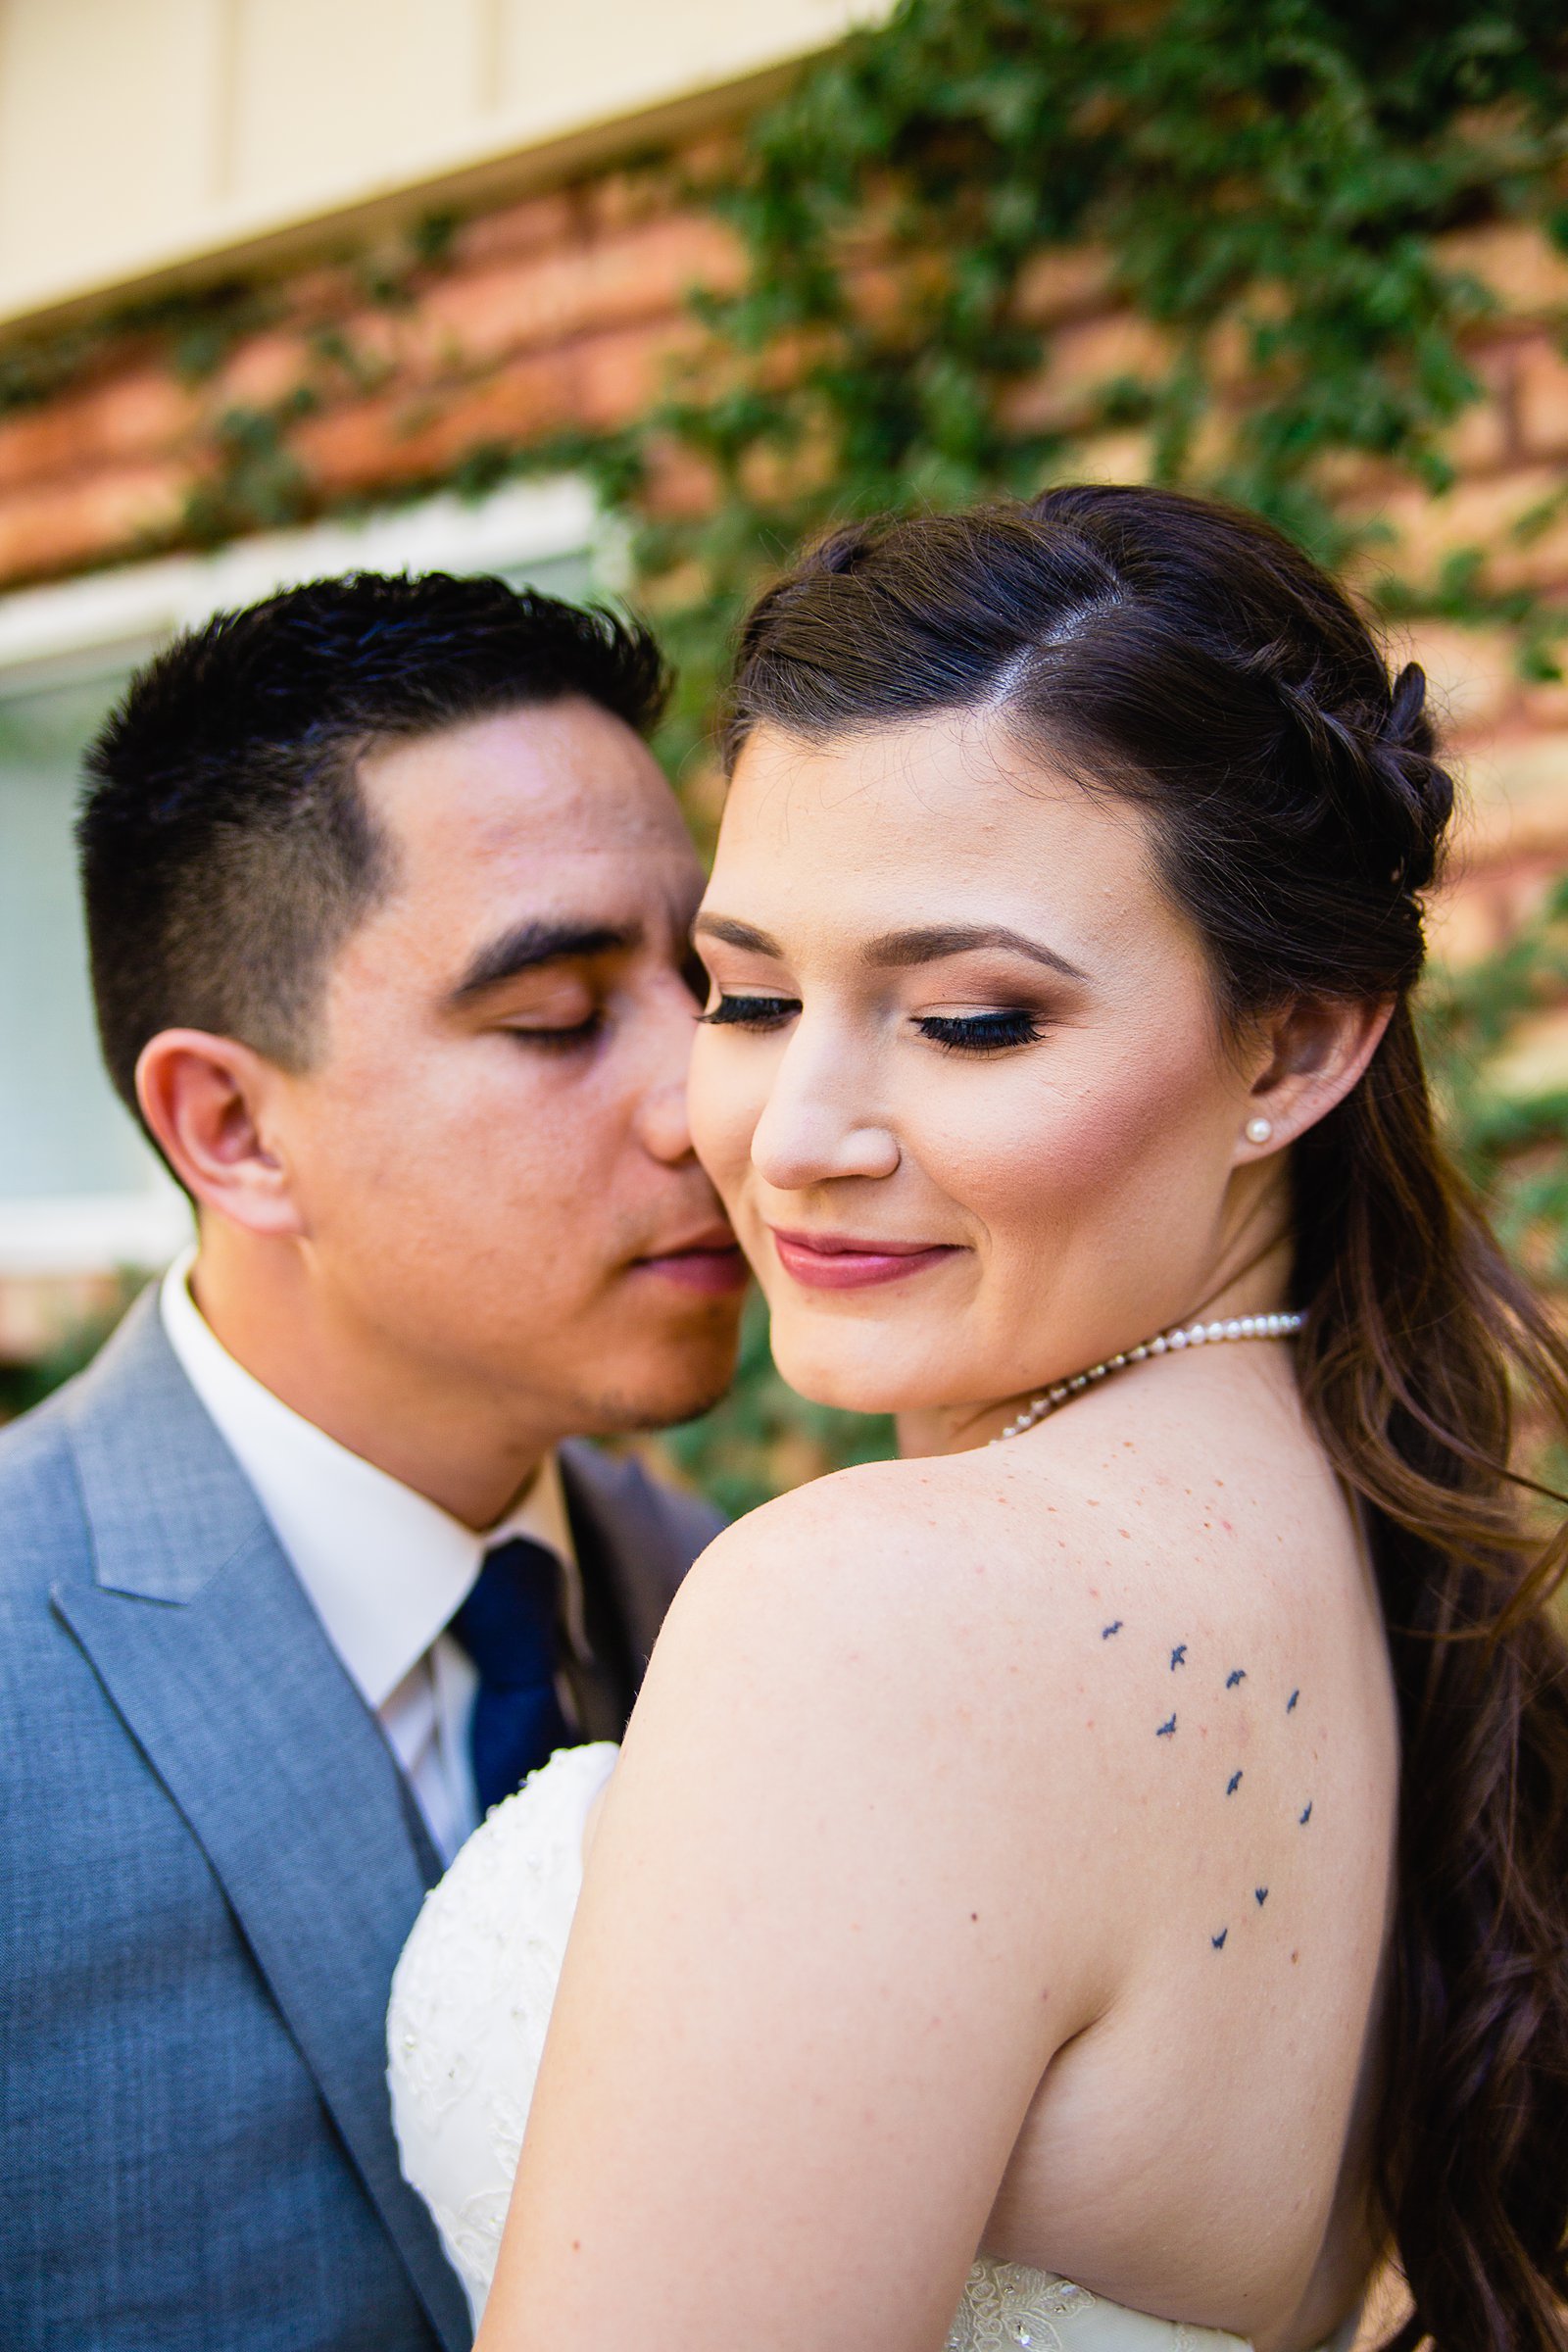 Bride and groom share an intimate moment at their Schnepf Farms wedding by Arizona wedding photographer PMA Photography.